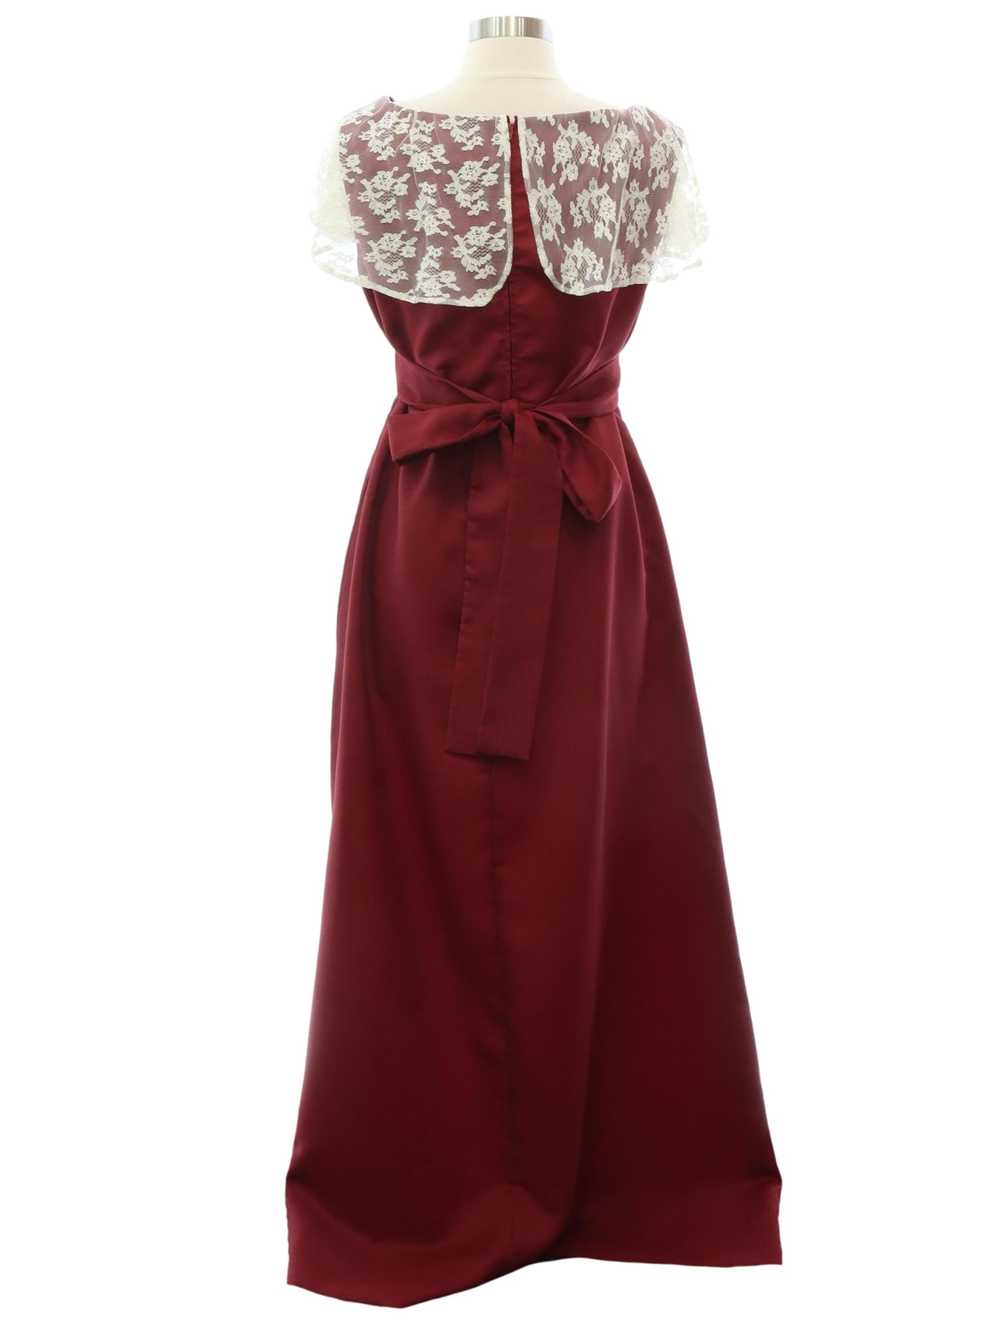 1970's Prom Or Cocktail Dress - image 3